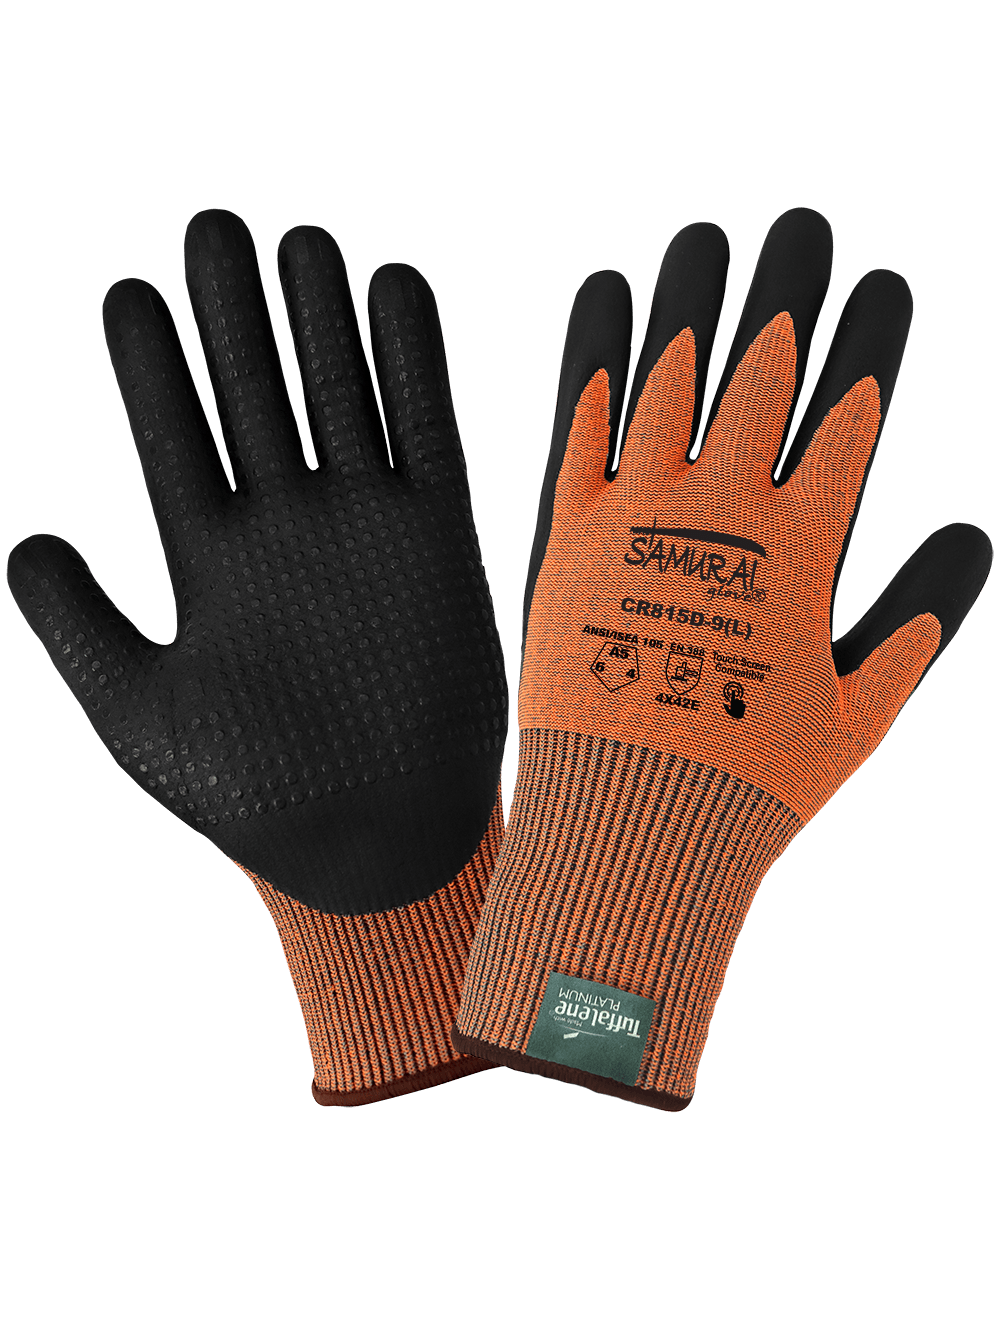 Samurai Glove® High-Visibility Cut Resistant Coated Touch Screen Gloves Made with 15-Gauge Tuffalene® Platinum - CR815D